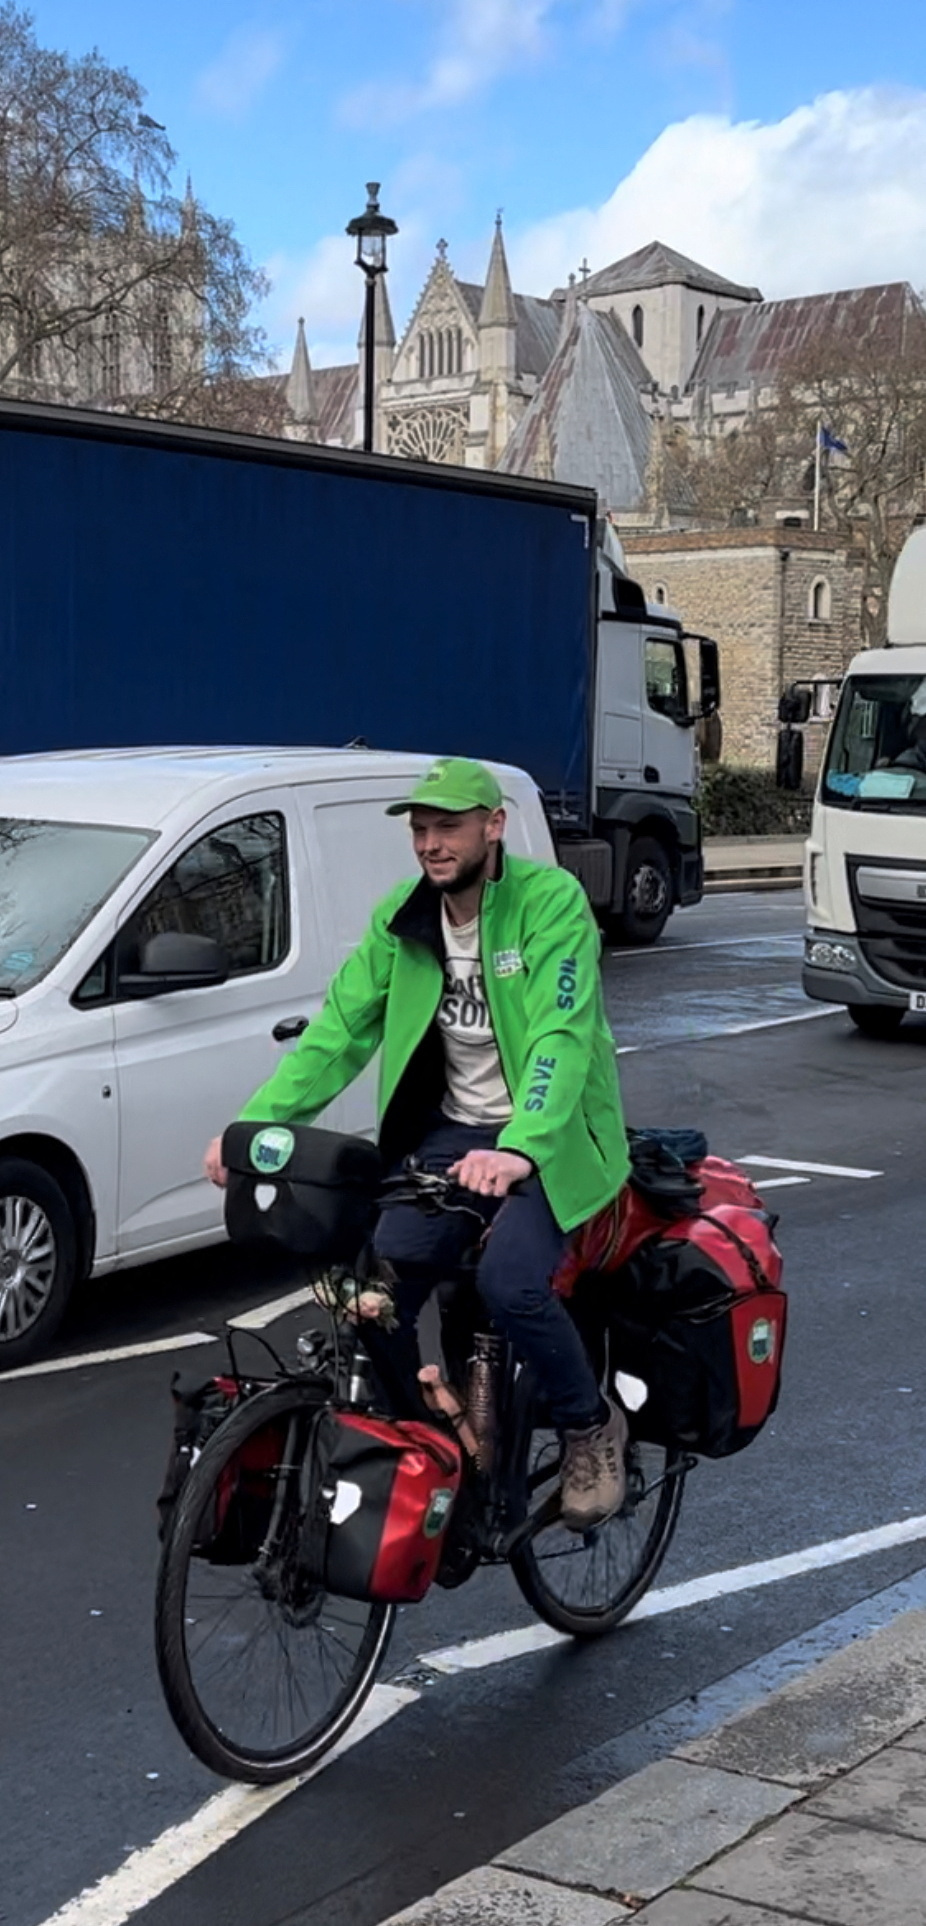 Rens Goede begins his bicycle trek from London to India in support of the 